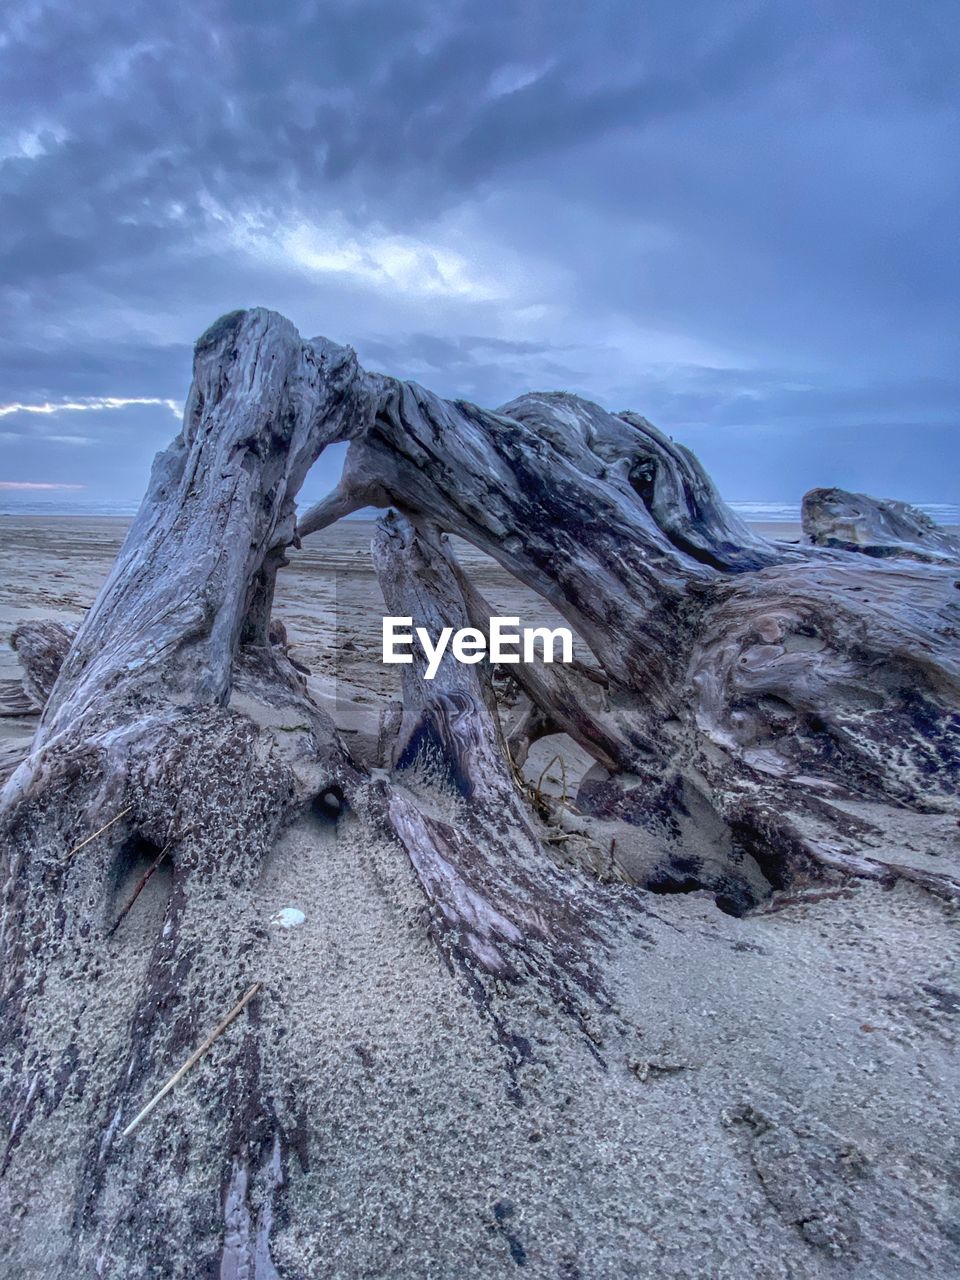 SCENIC VIEW OF DRIFTWOOD ON BEACH